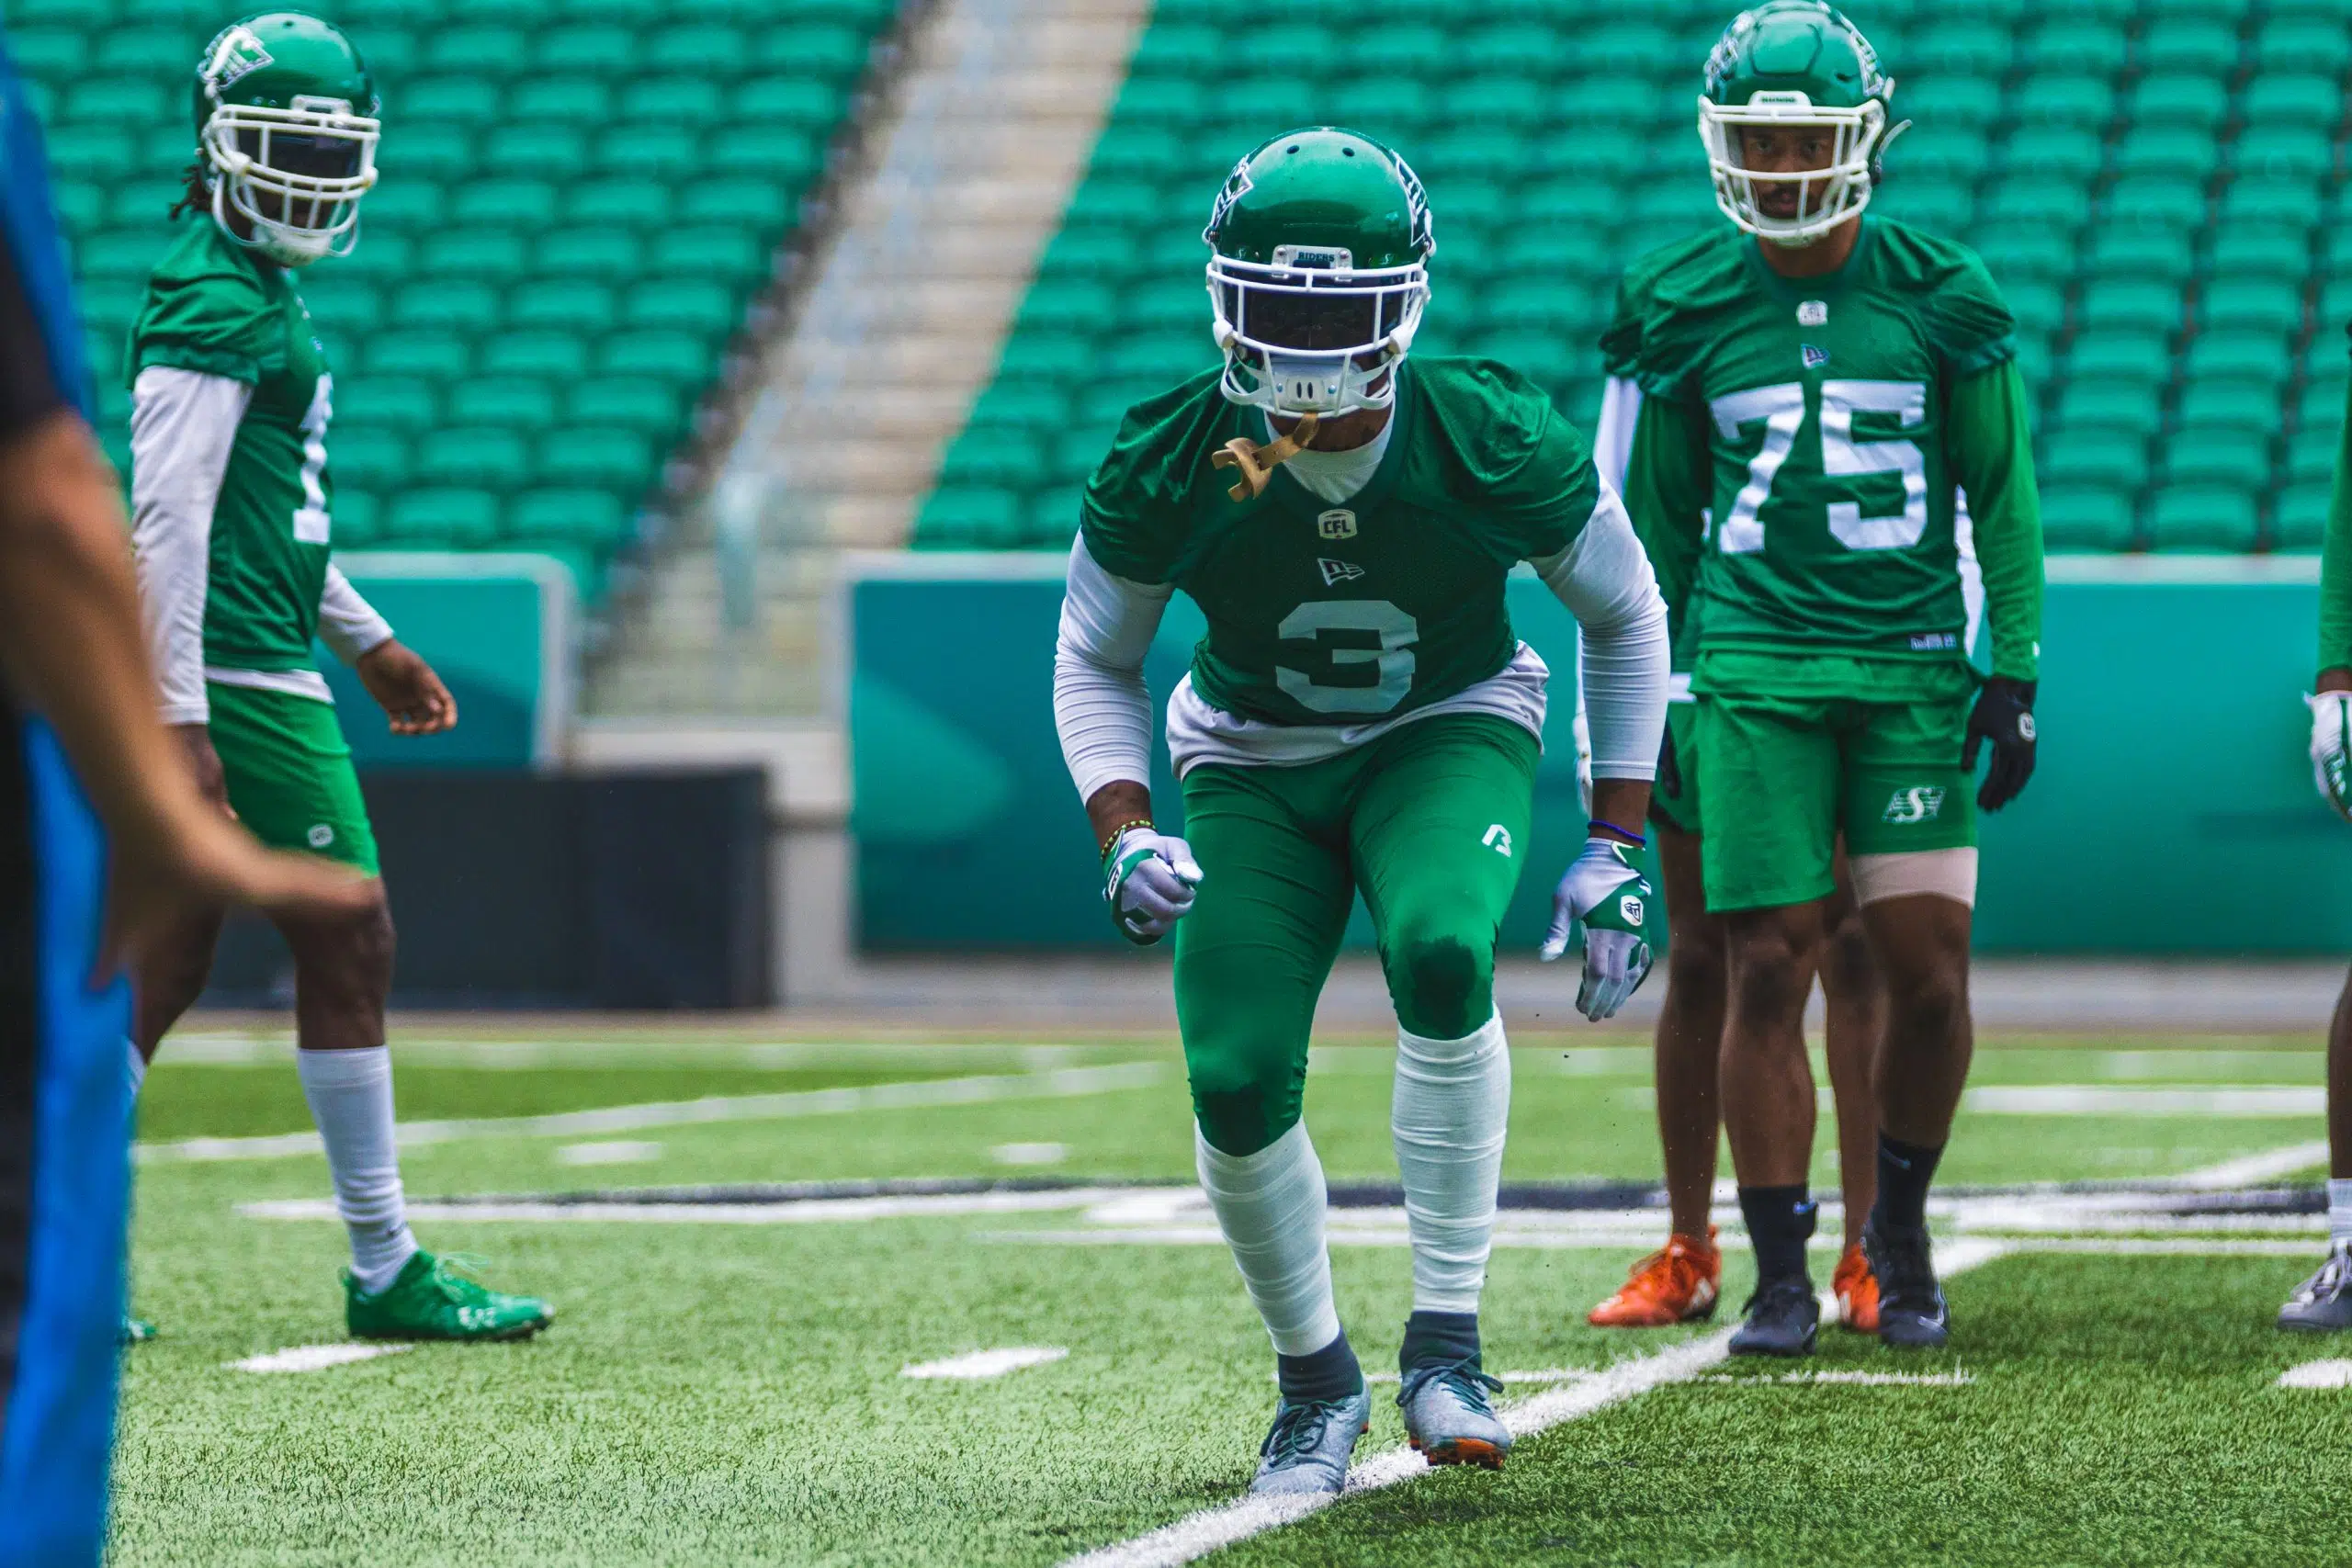 Riders remarkable reunion - former Auburn teammates back on the field again